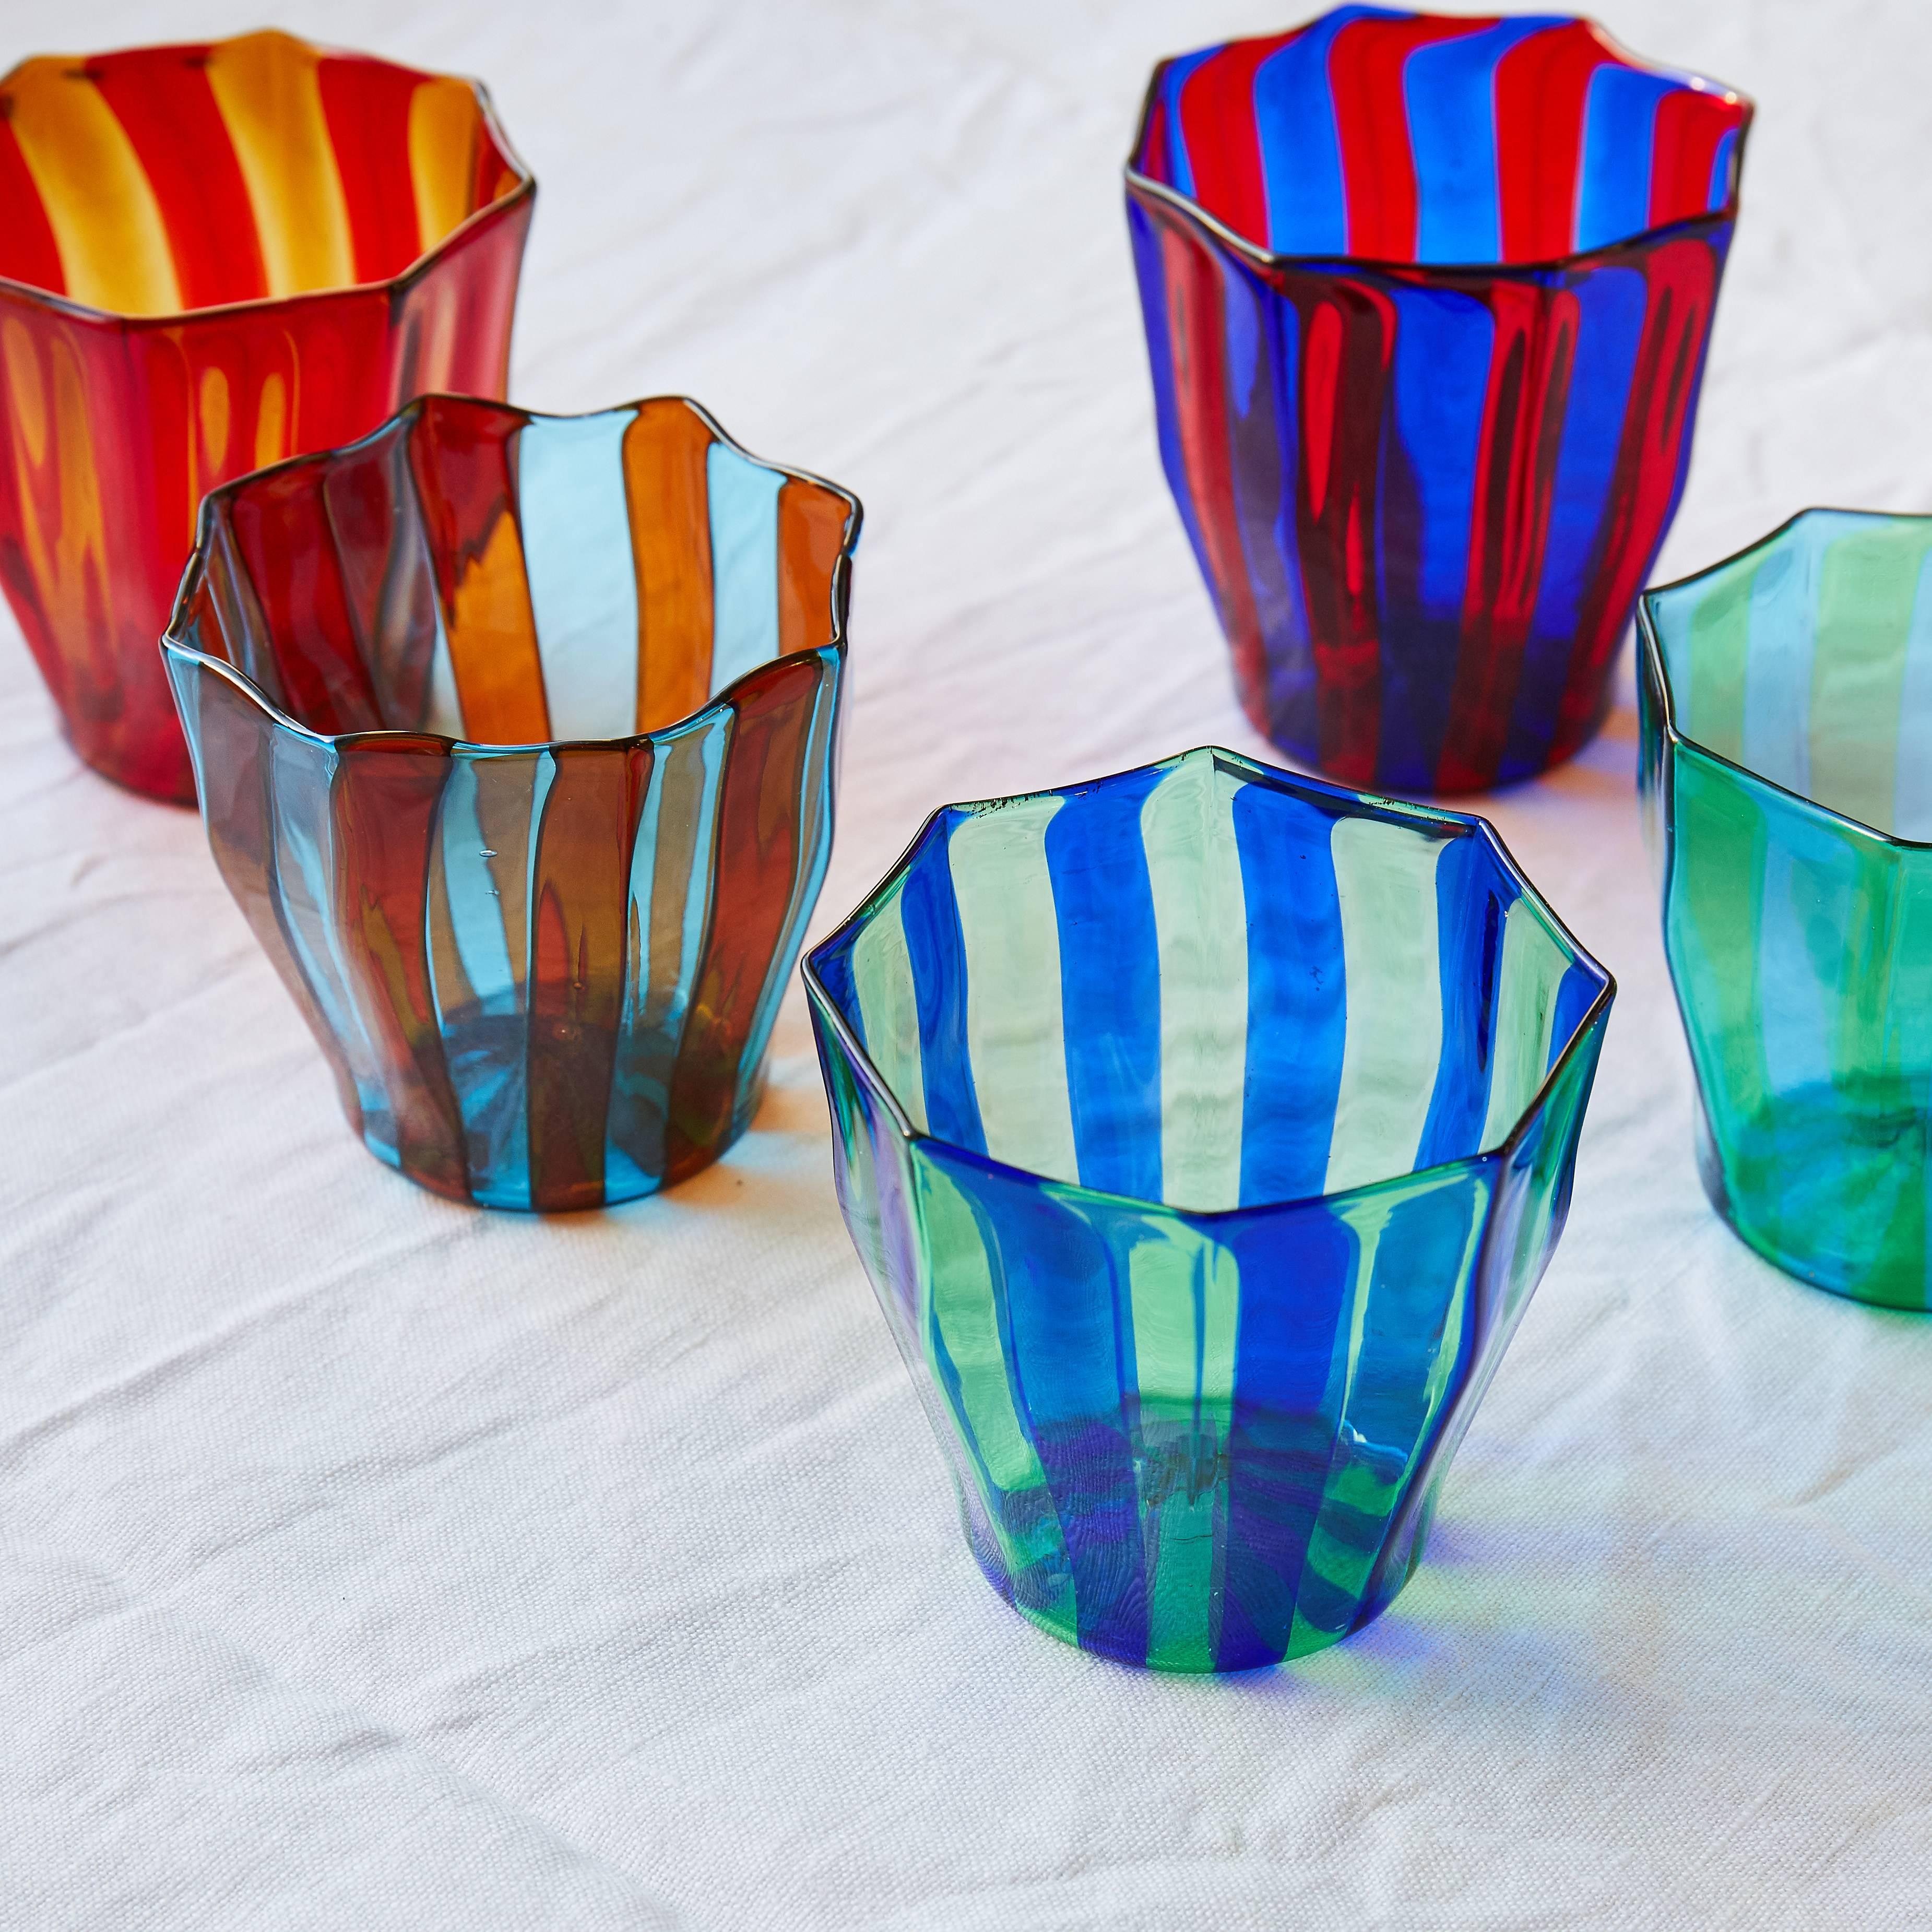 Campbell-Rey continue their exploration of color and geometric form, introducing new expressions to traditional materials. Presenting Rosanna, a Murano glassware collection comprised of an octagonal tumbler, carafe and bowl in five striped